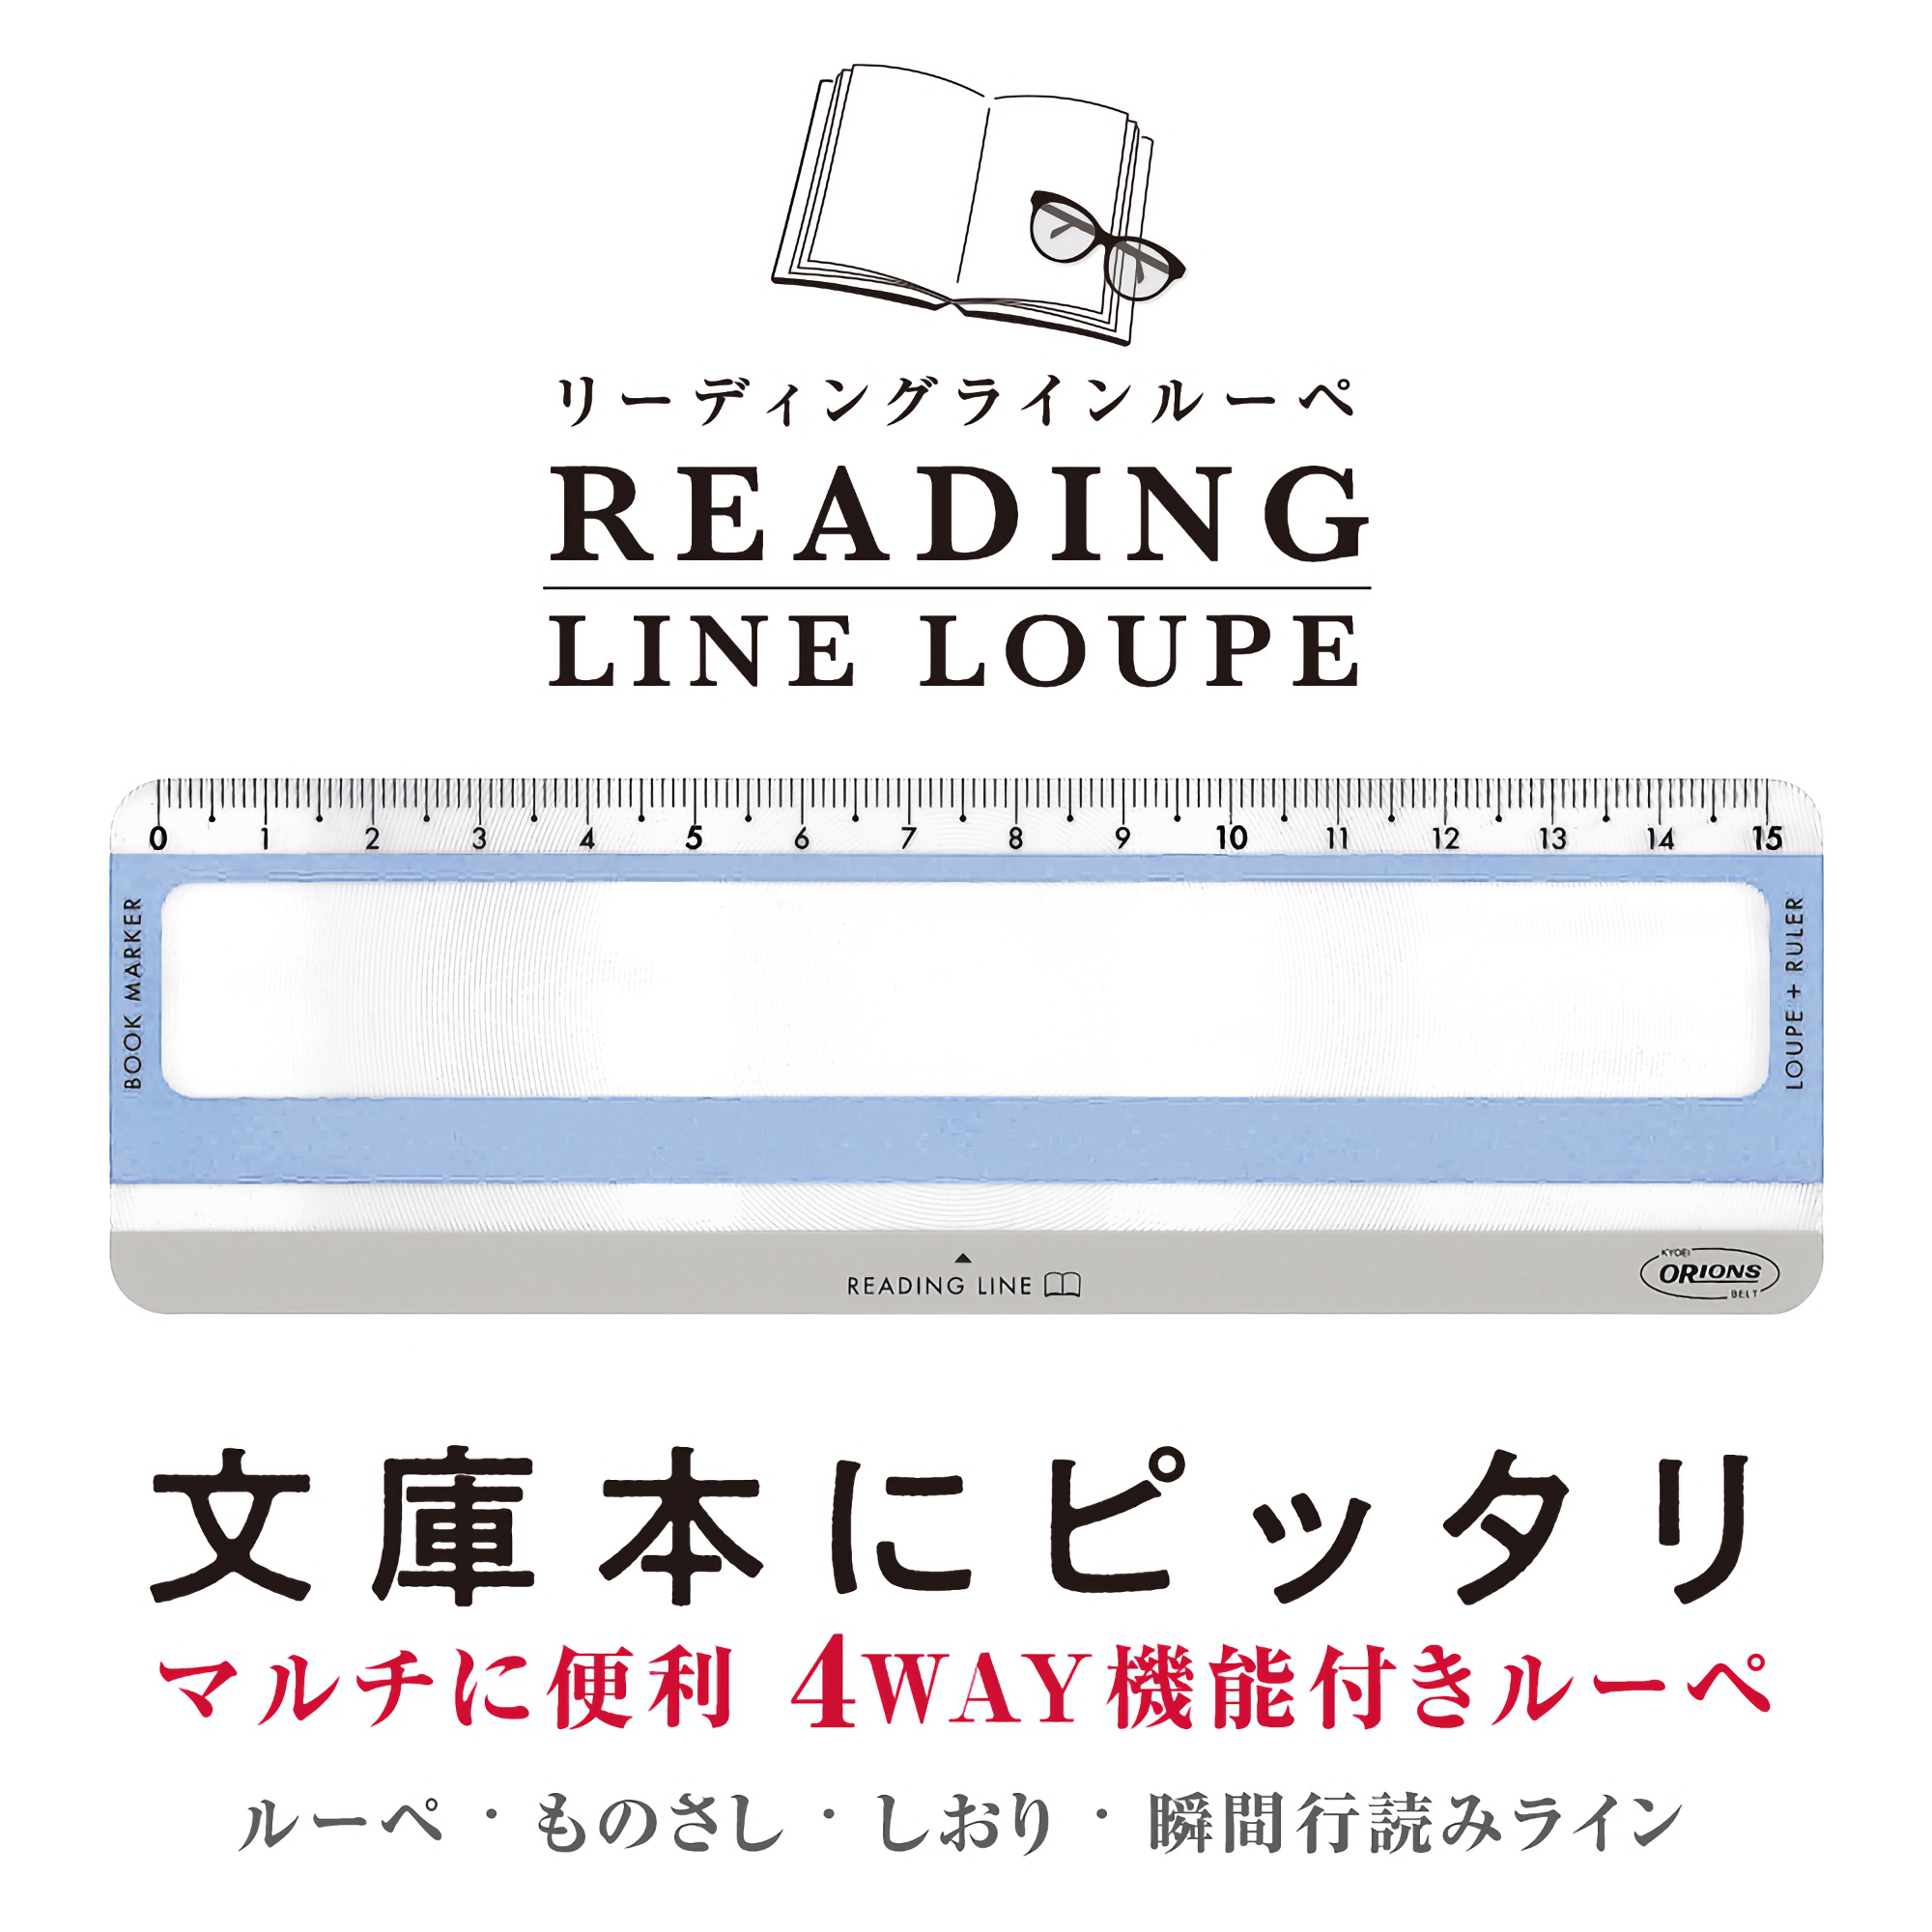 Kyoei Orions Reading Line Loupe Fountain Blue & Moonstone Gray